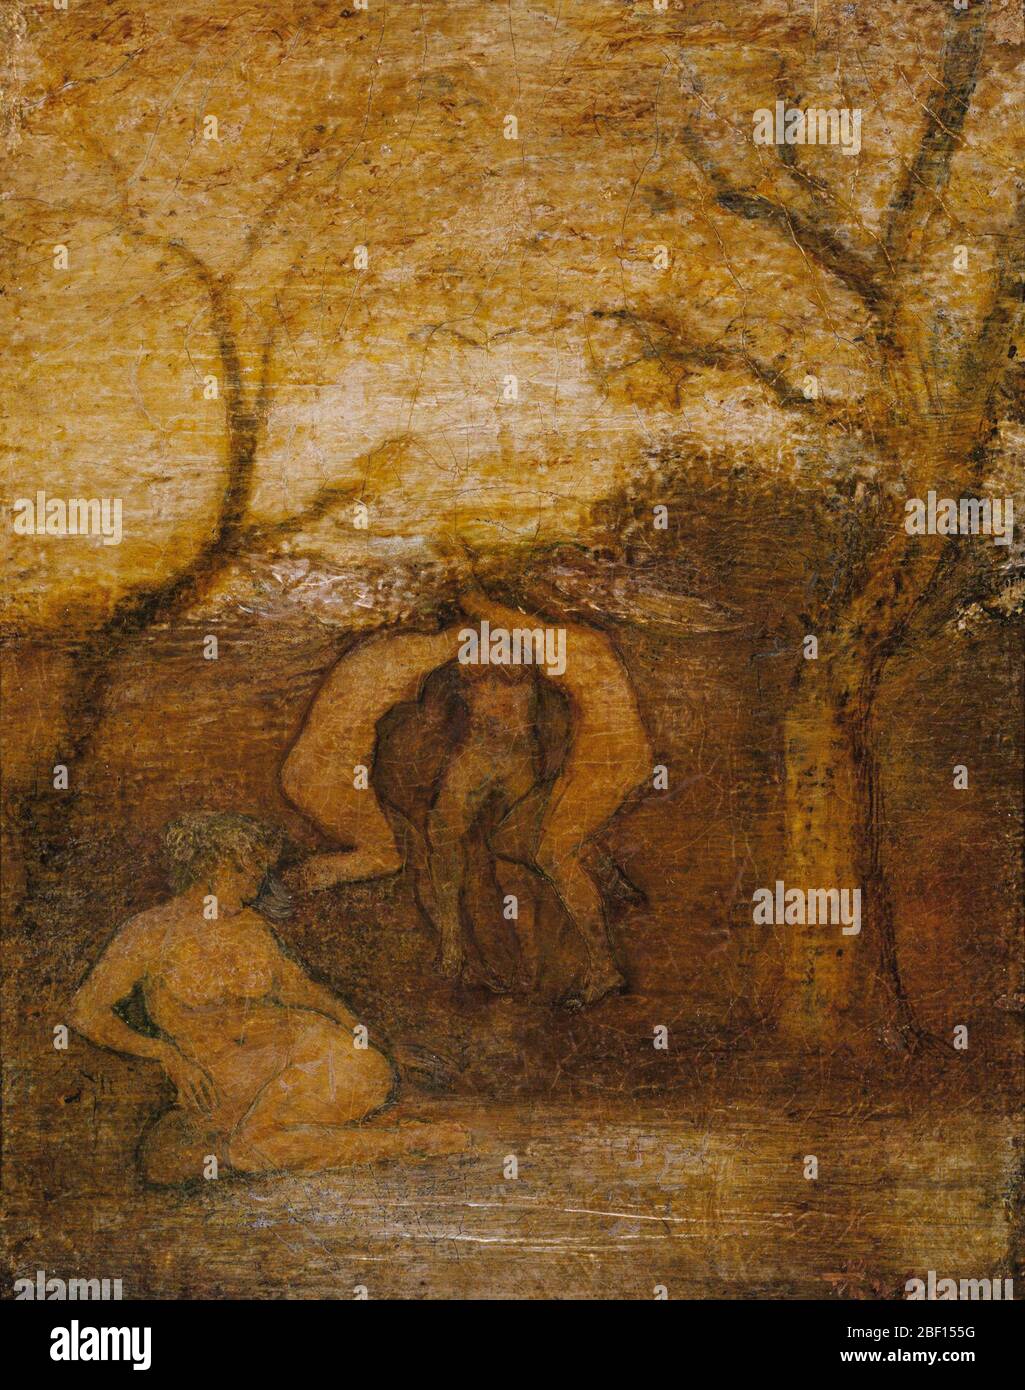 Dancing Dryads. Many American painters in the nineteenth century painted nature as a classical world of dryads, nymphs, and other imaginary creatures. Albert Pinkham Ryder was inspired by a painting by Jean-Baptiste Camille Corot that shows dancing figures in an atmospheric, intimate landscape. Stock Photo